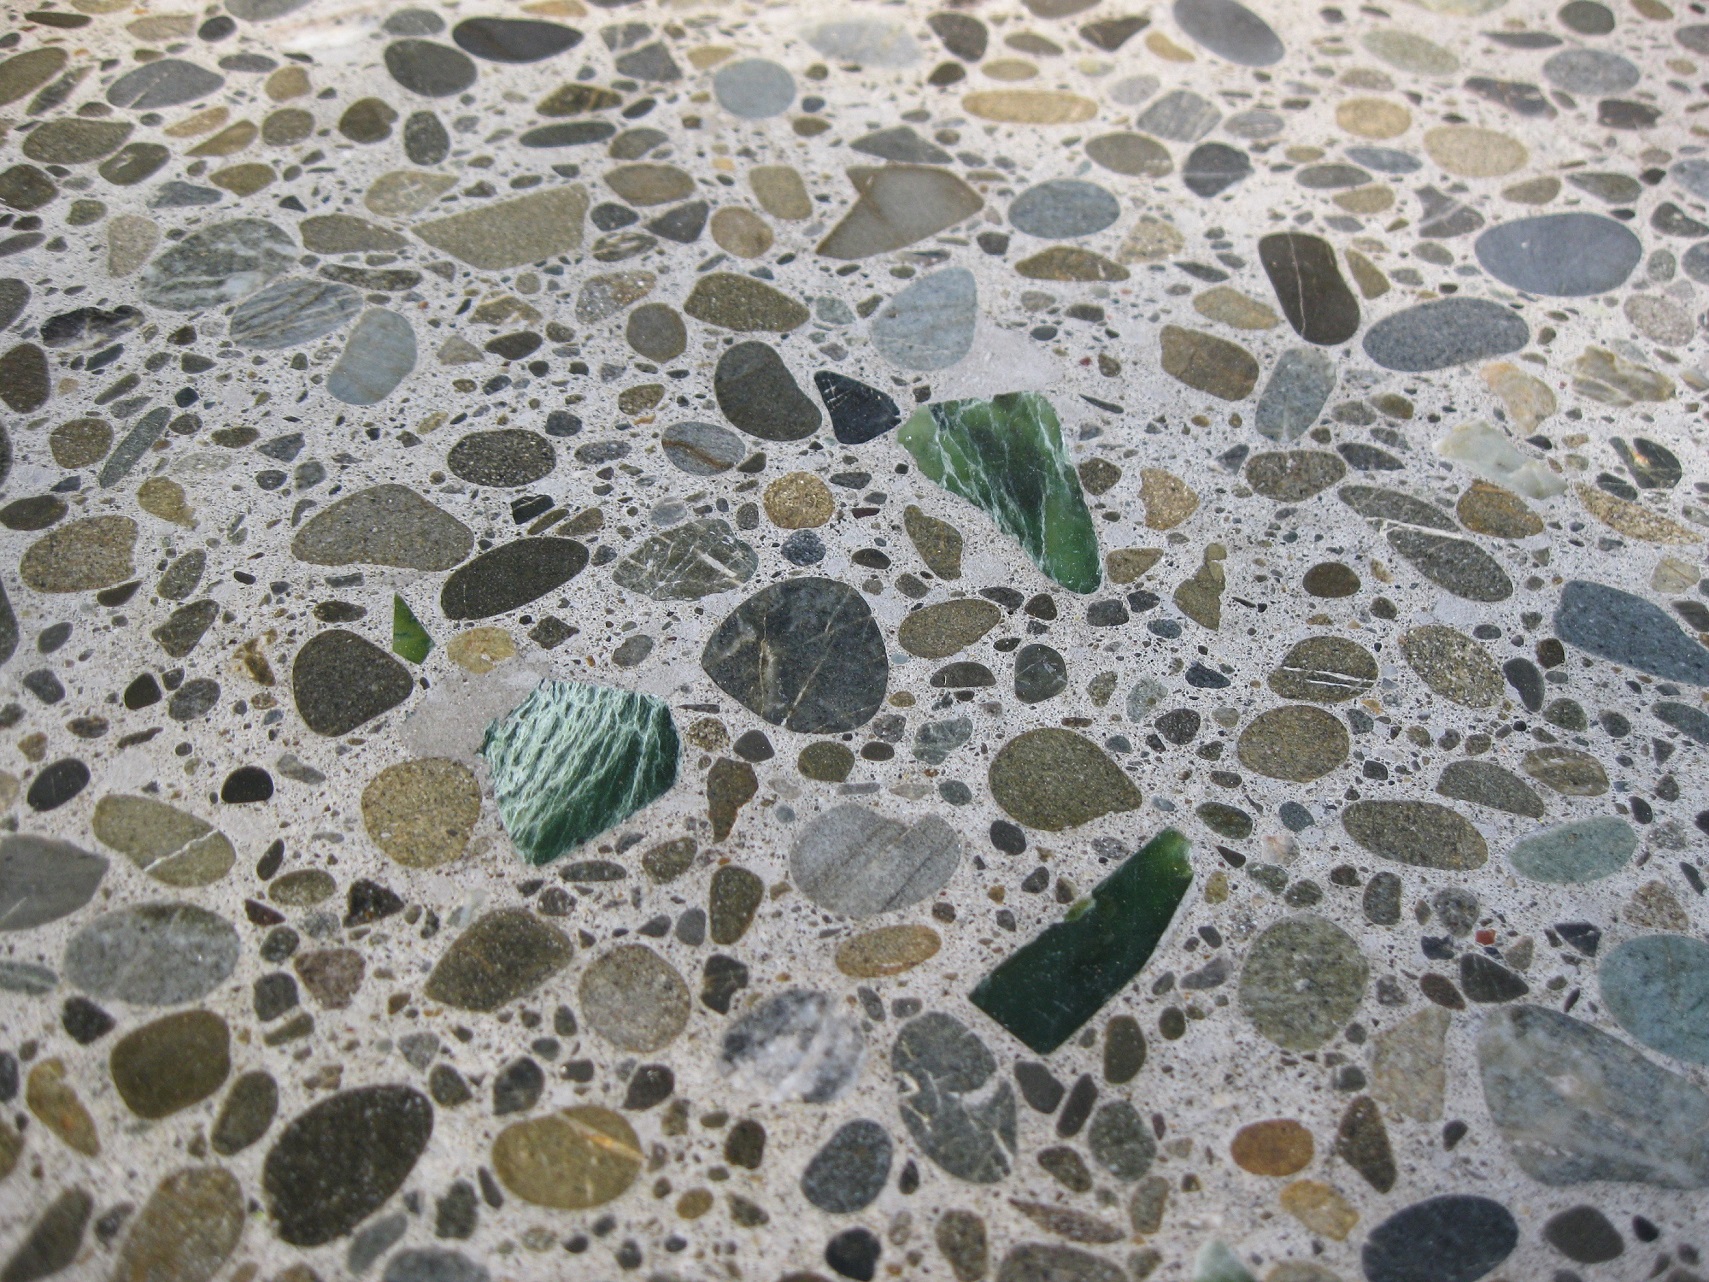 2593-natural-river-stone-aggregate-exposed-grind-ground-polished-concrete-christchurc-16649263376162.jpg